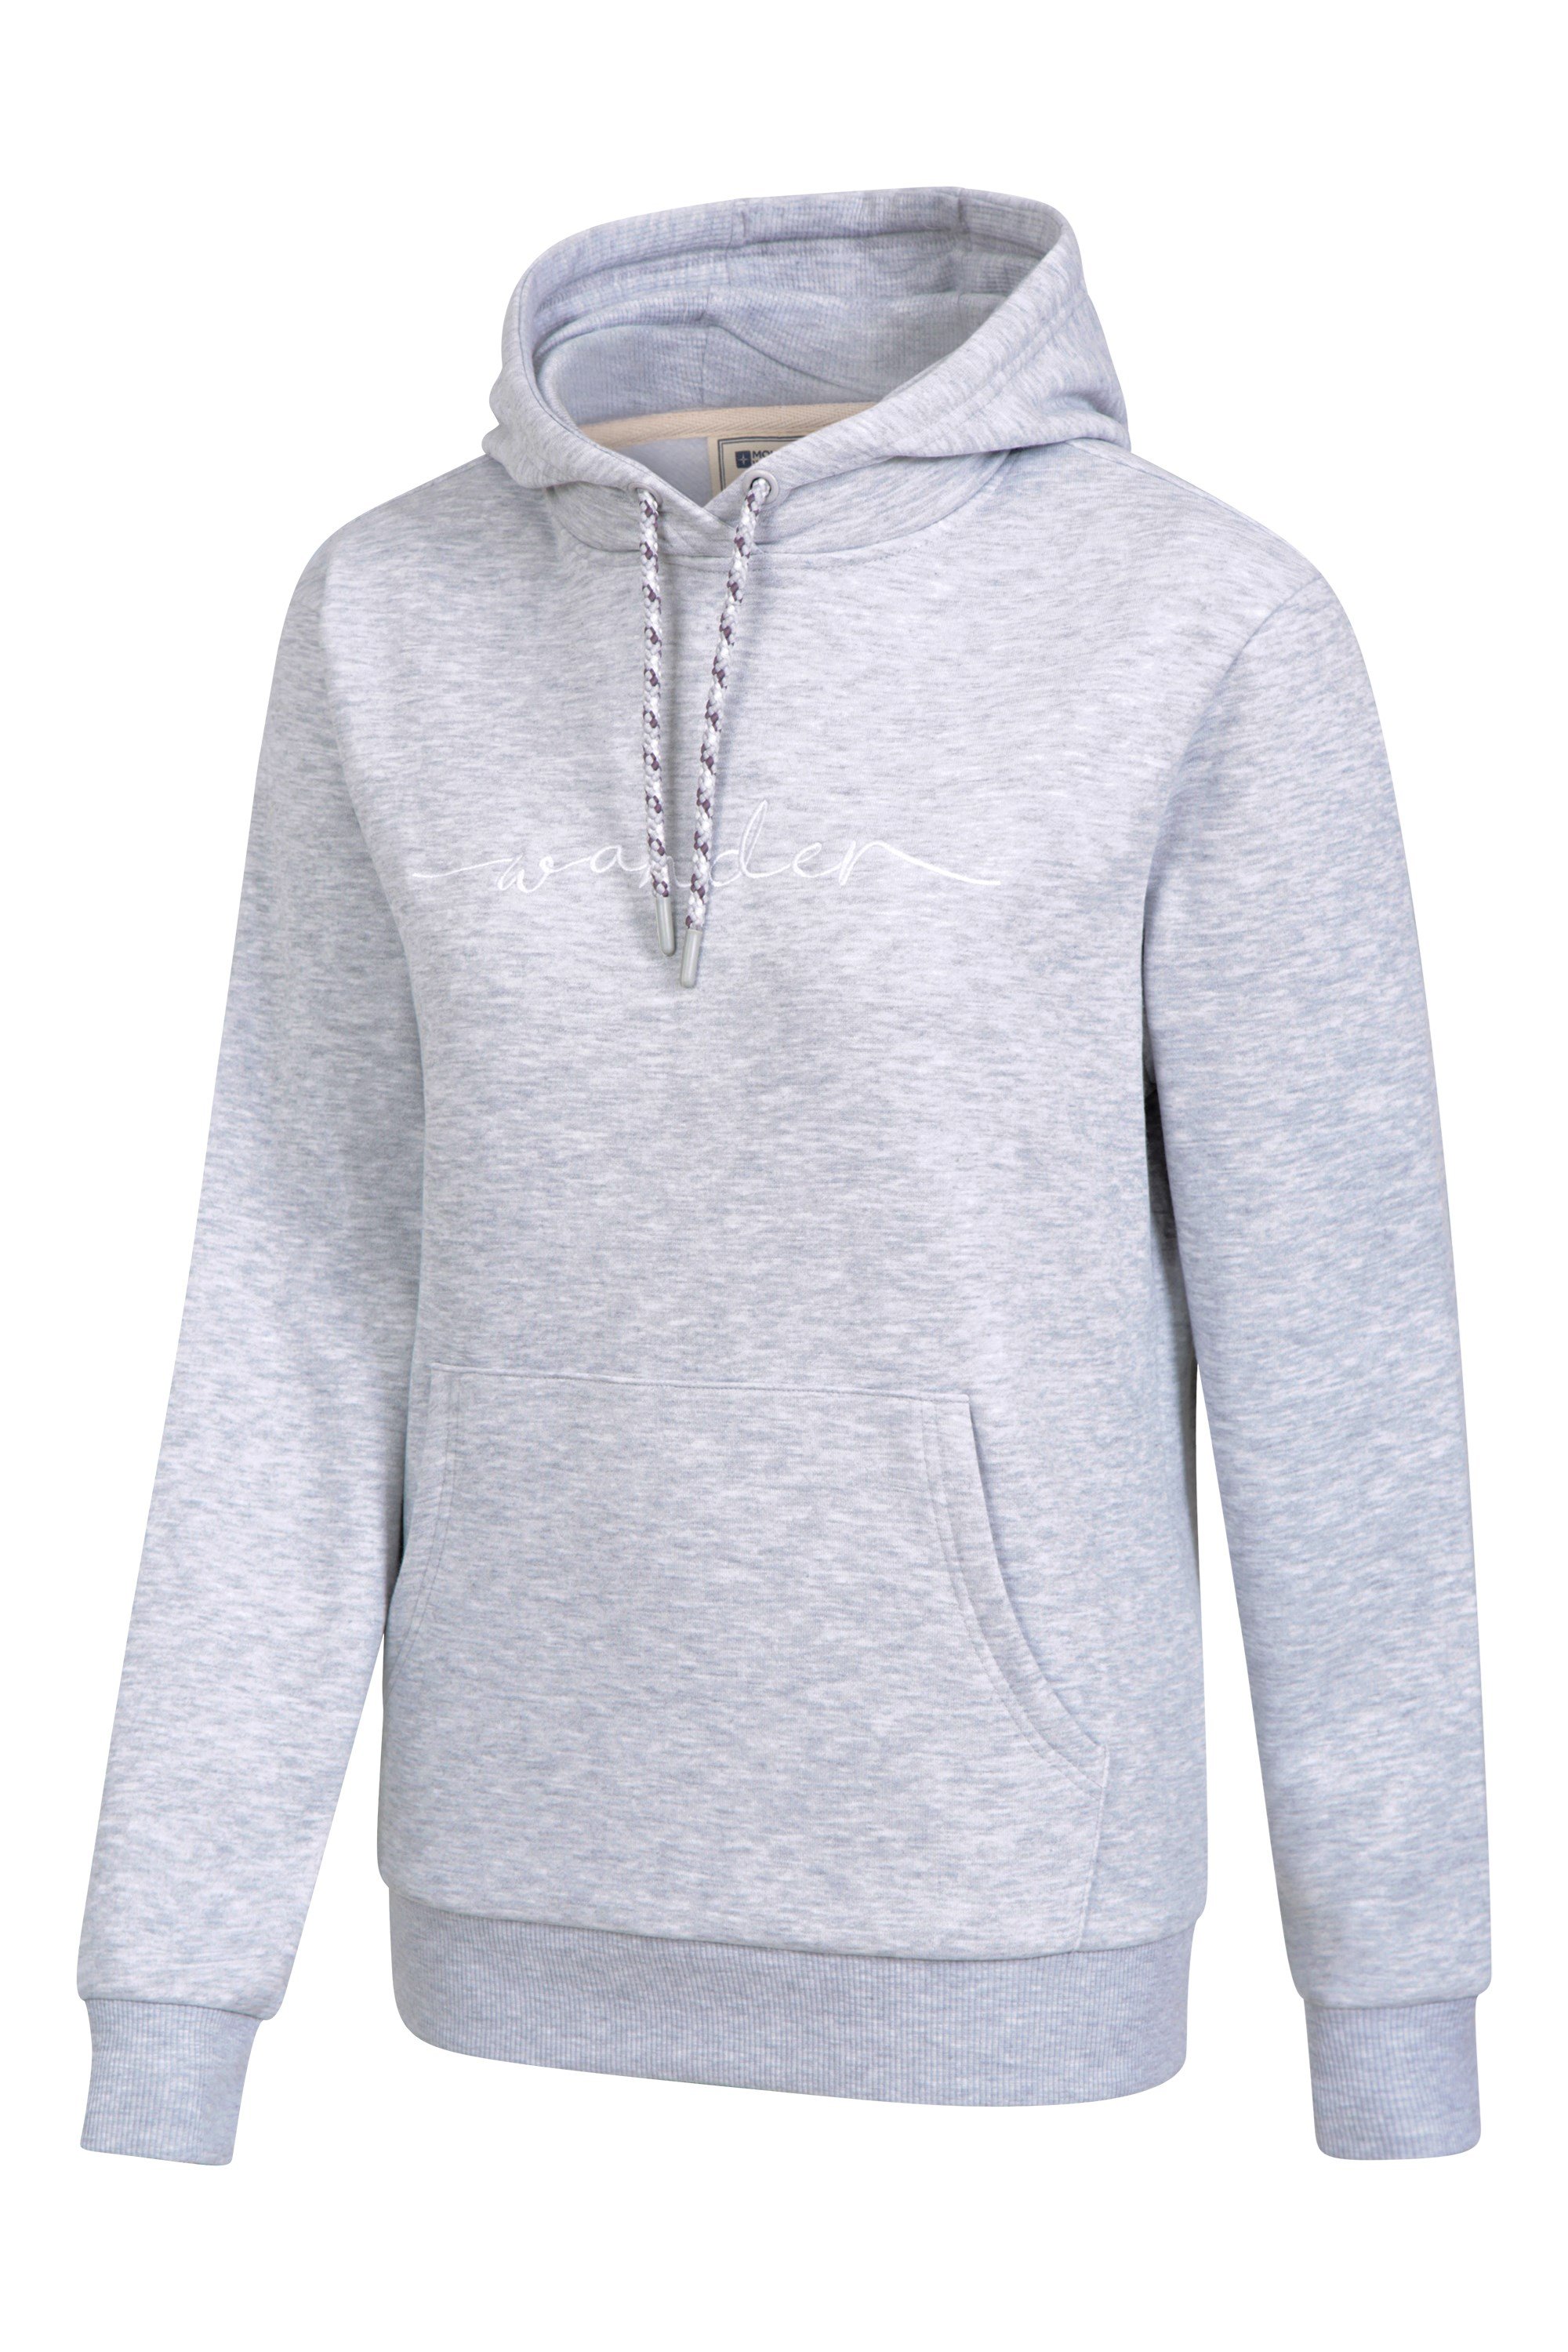 Wander Womens Embroidered Hoodie